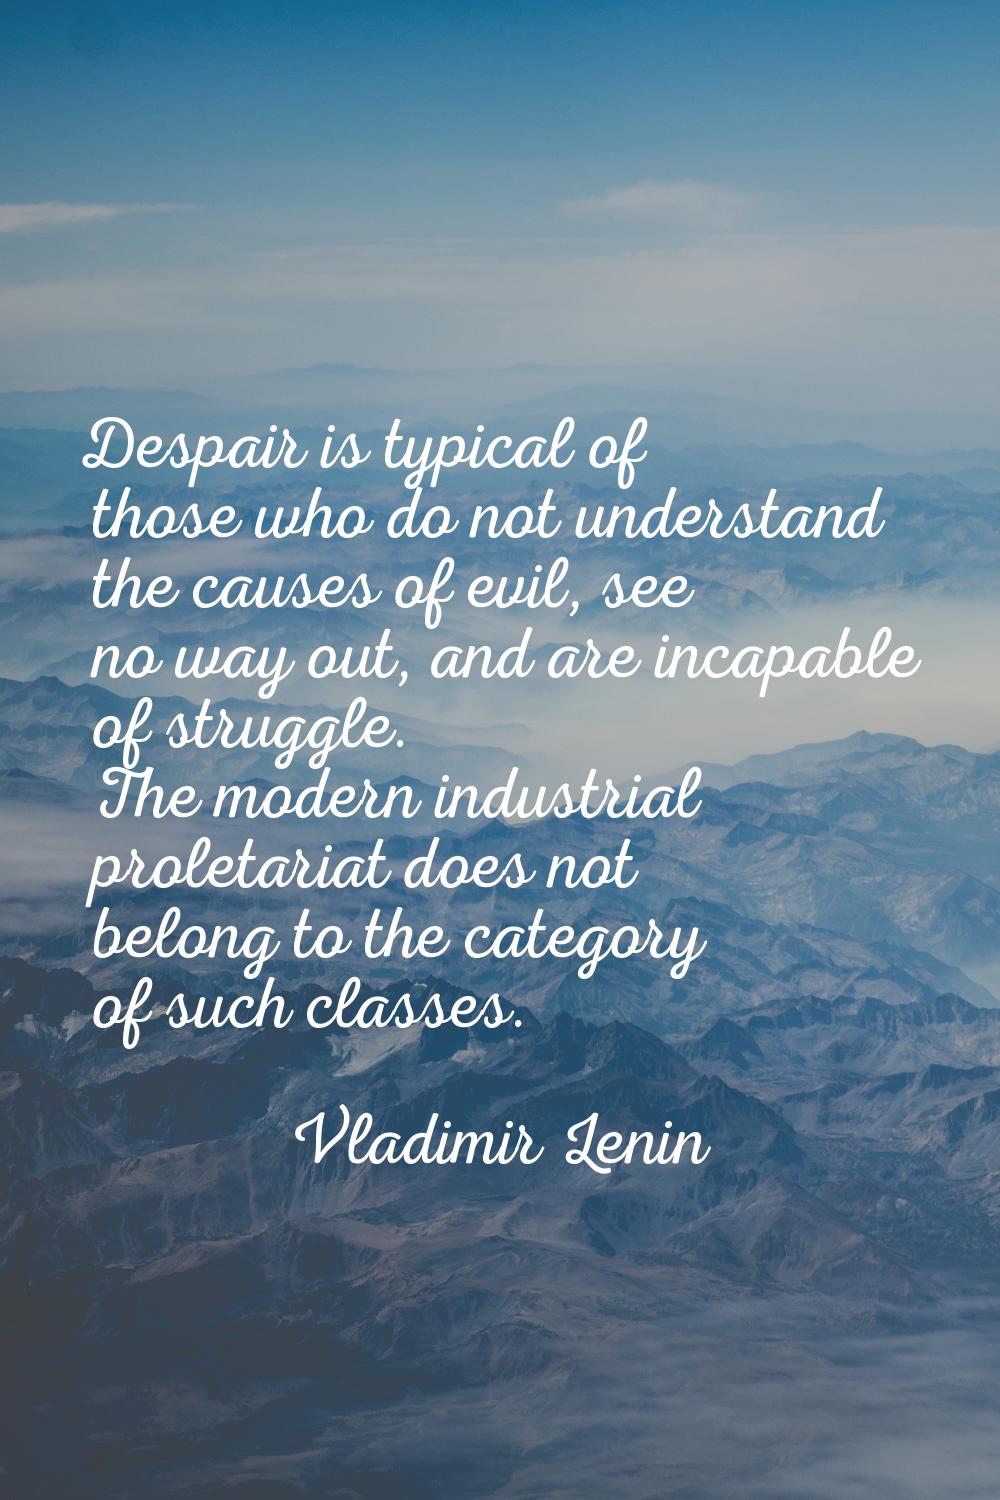 Despair is typical of those who do not understand the causes of evil, see no way out, and are incap